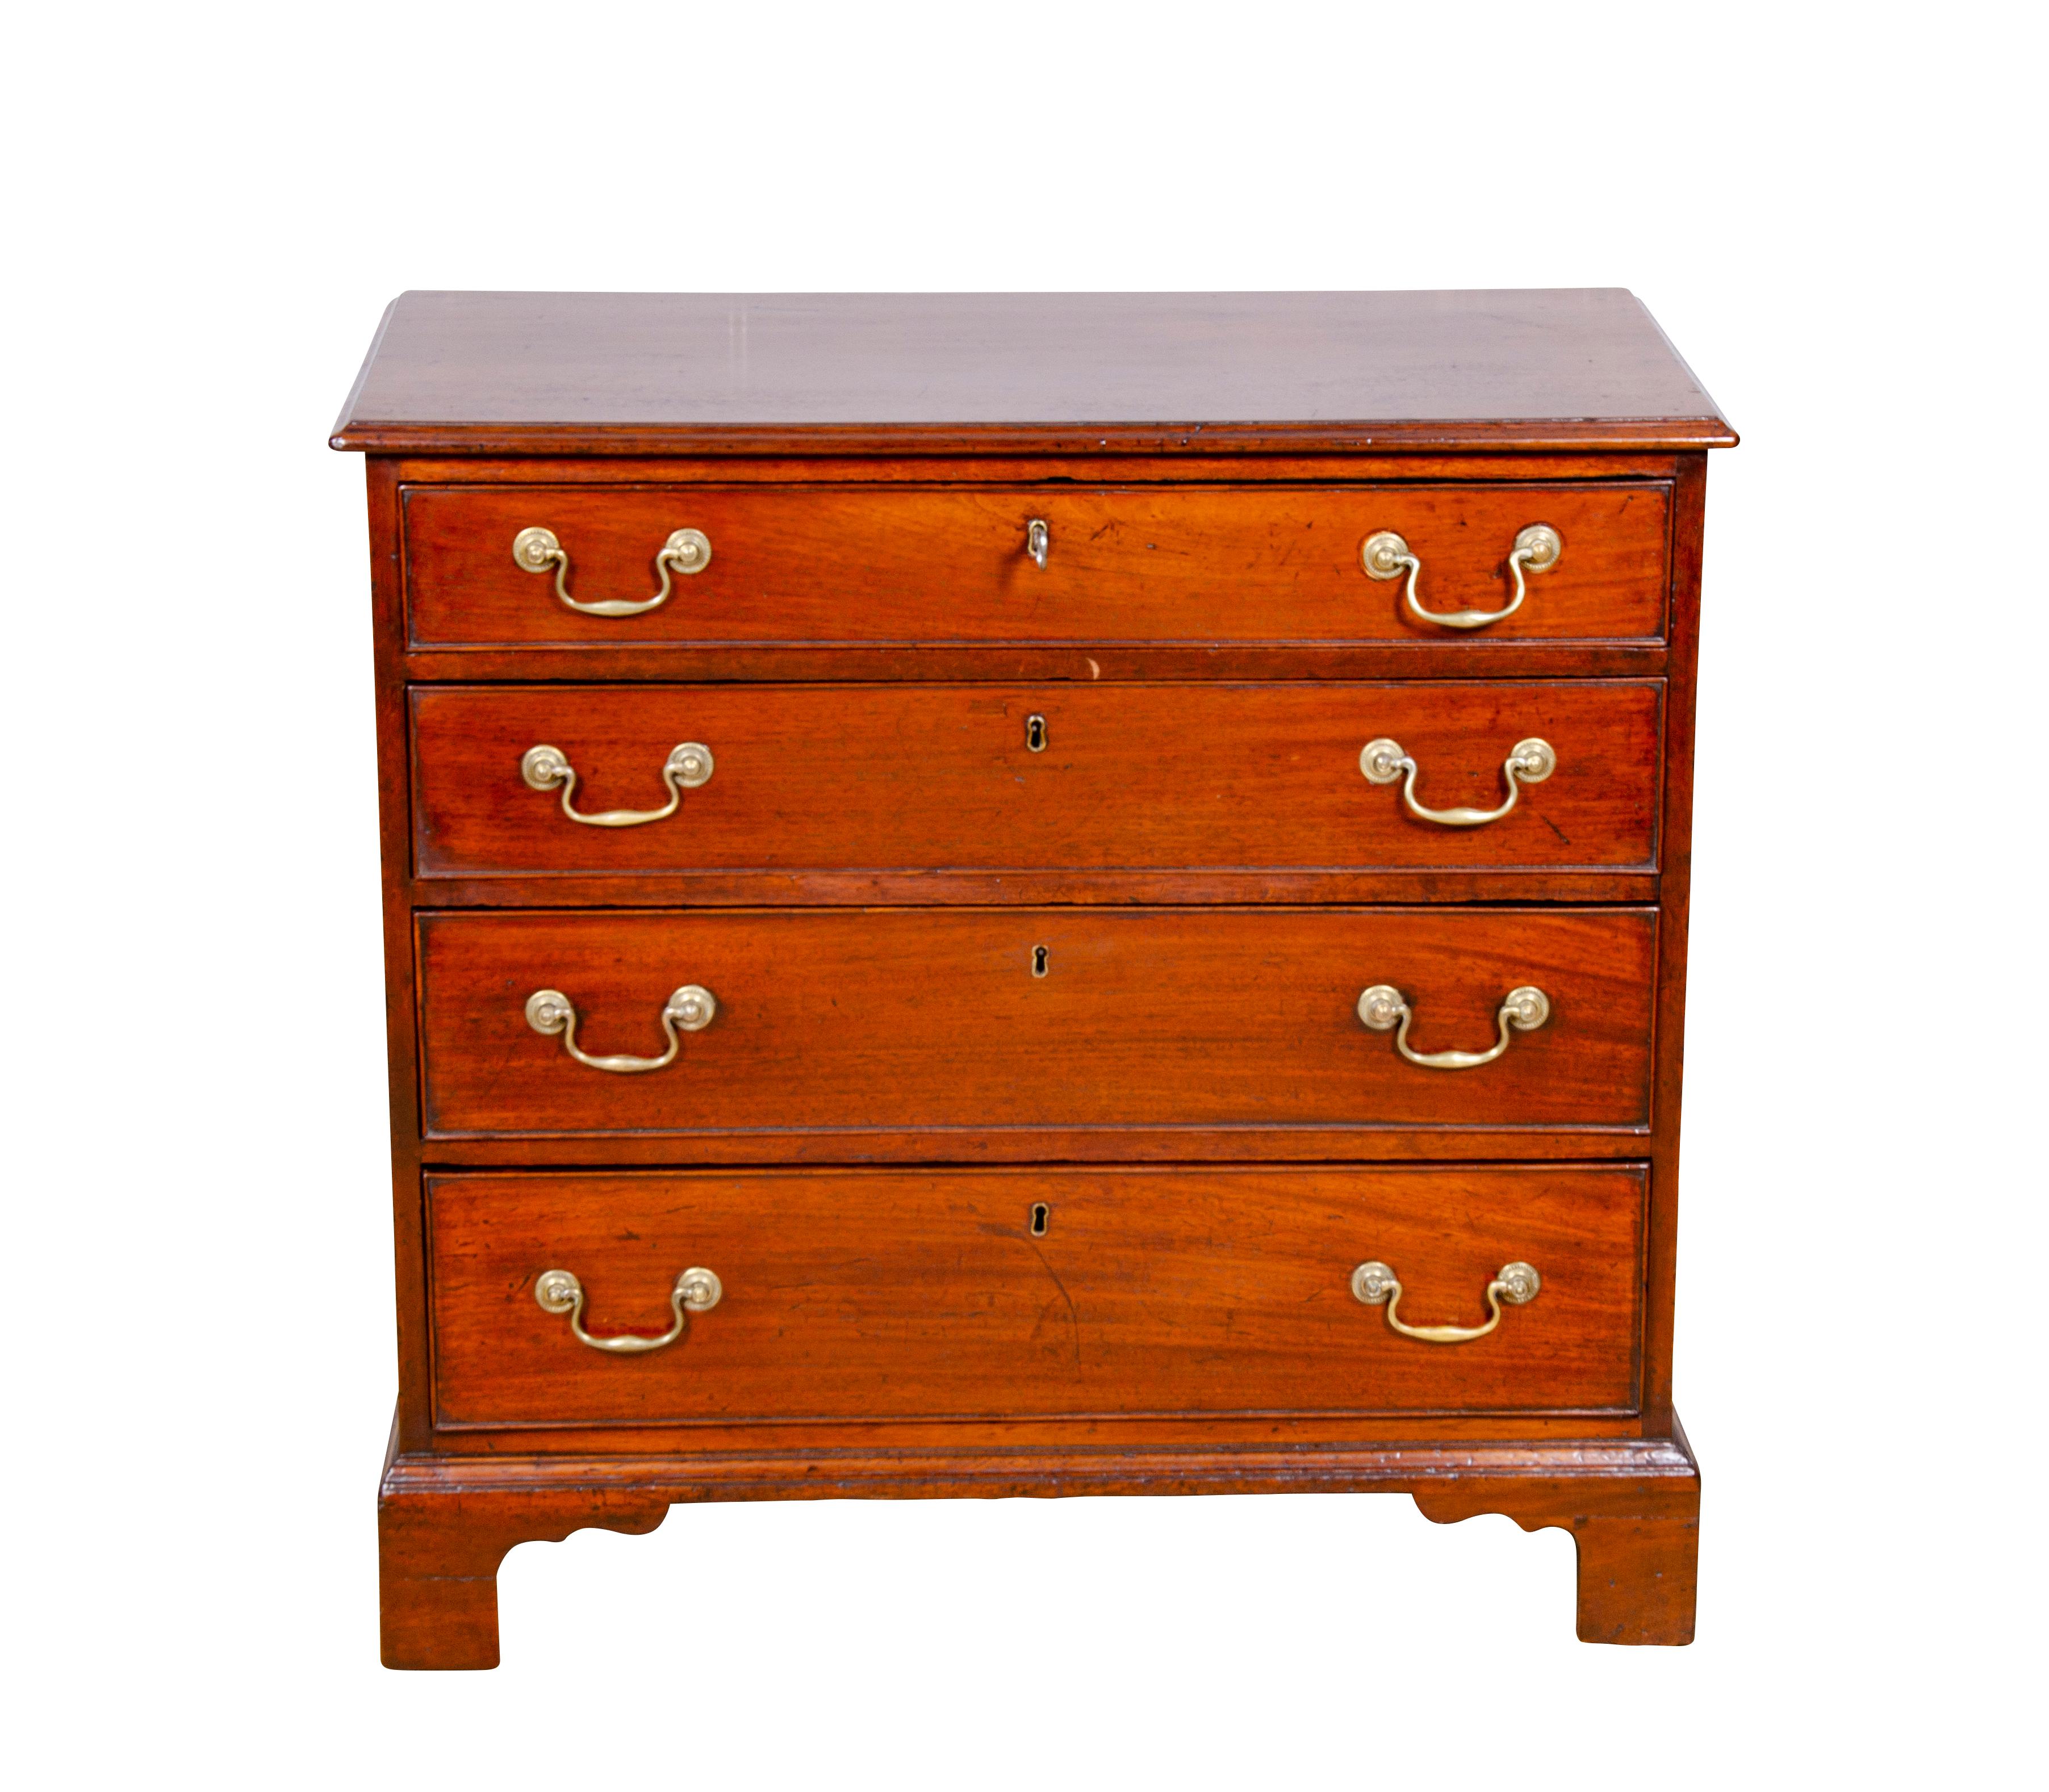 Rectangular top with molded edge over four graduated drawers with brass bail handles raised on bracket feet.